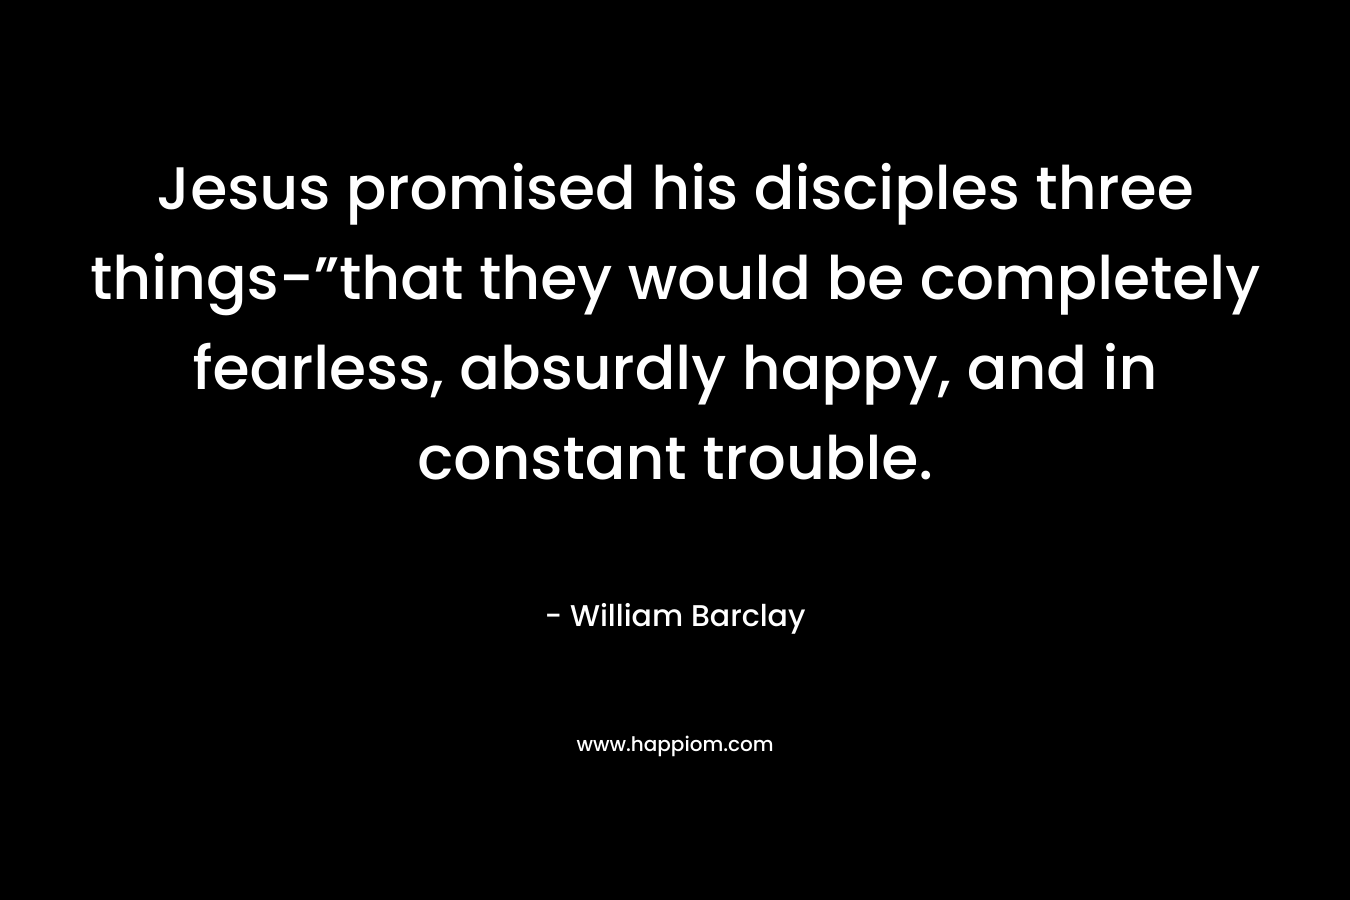 Jesus promised his disciples three things-”that they would be completely fearless, absurdly happy, and in constant trouble. – William Barclay